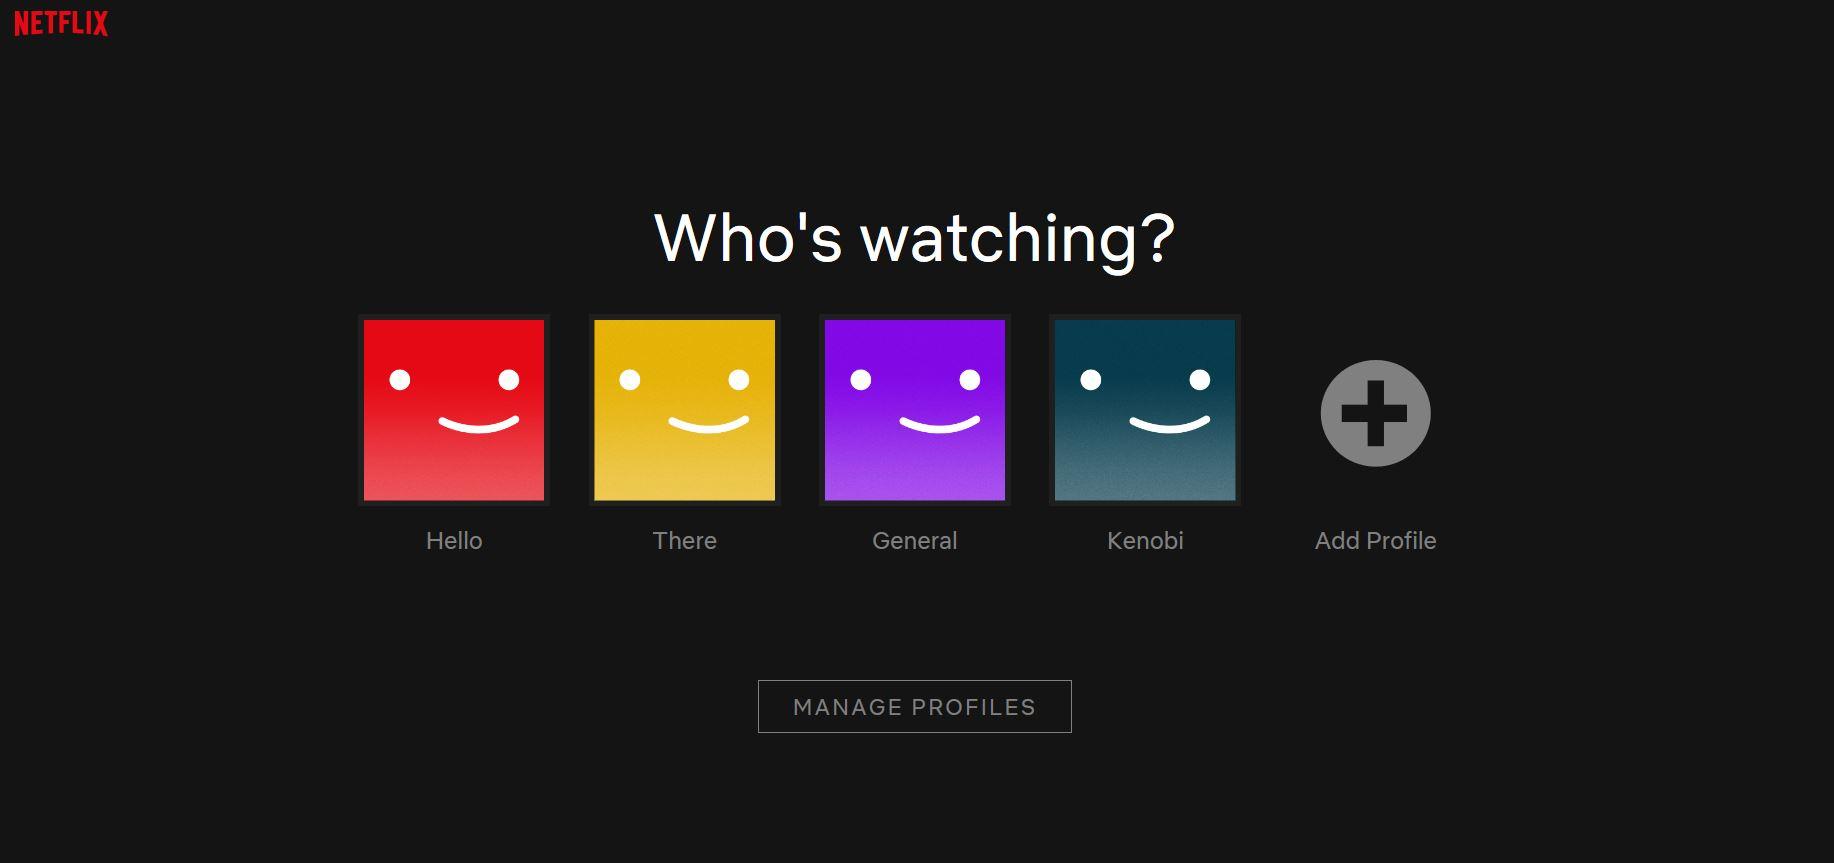 Stream Netflix for Free with a Friend Account